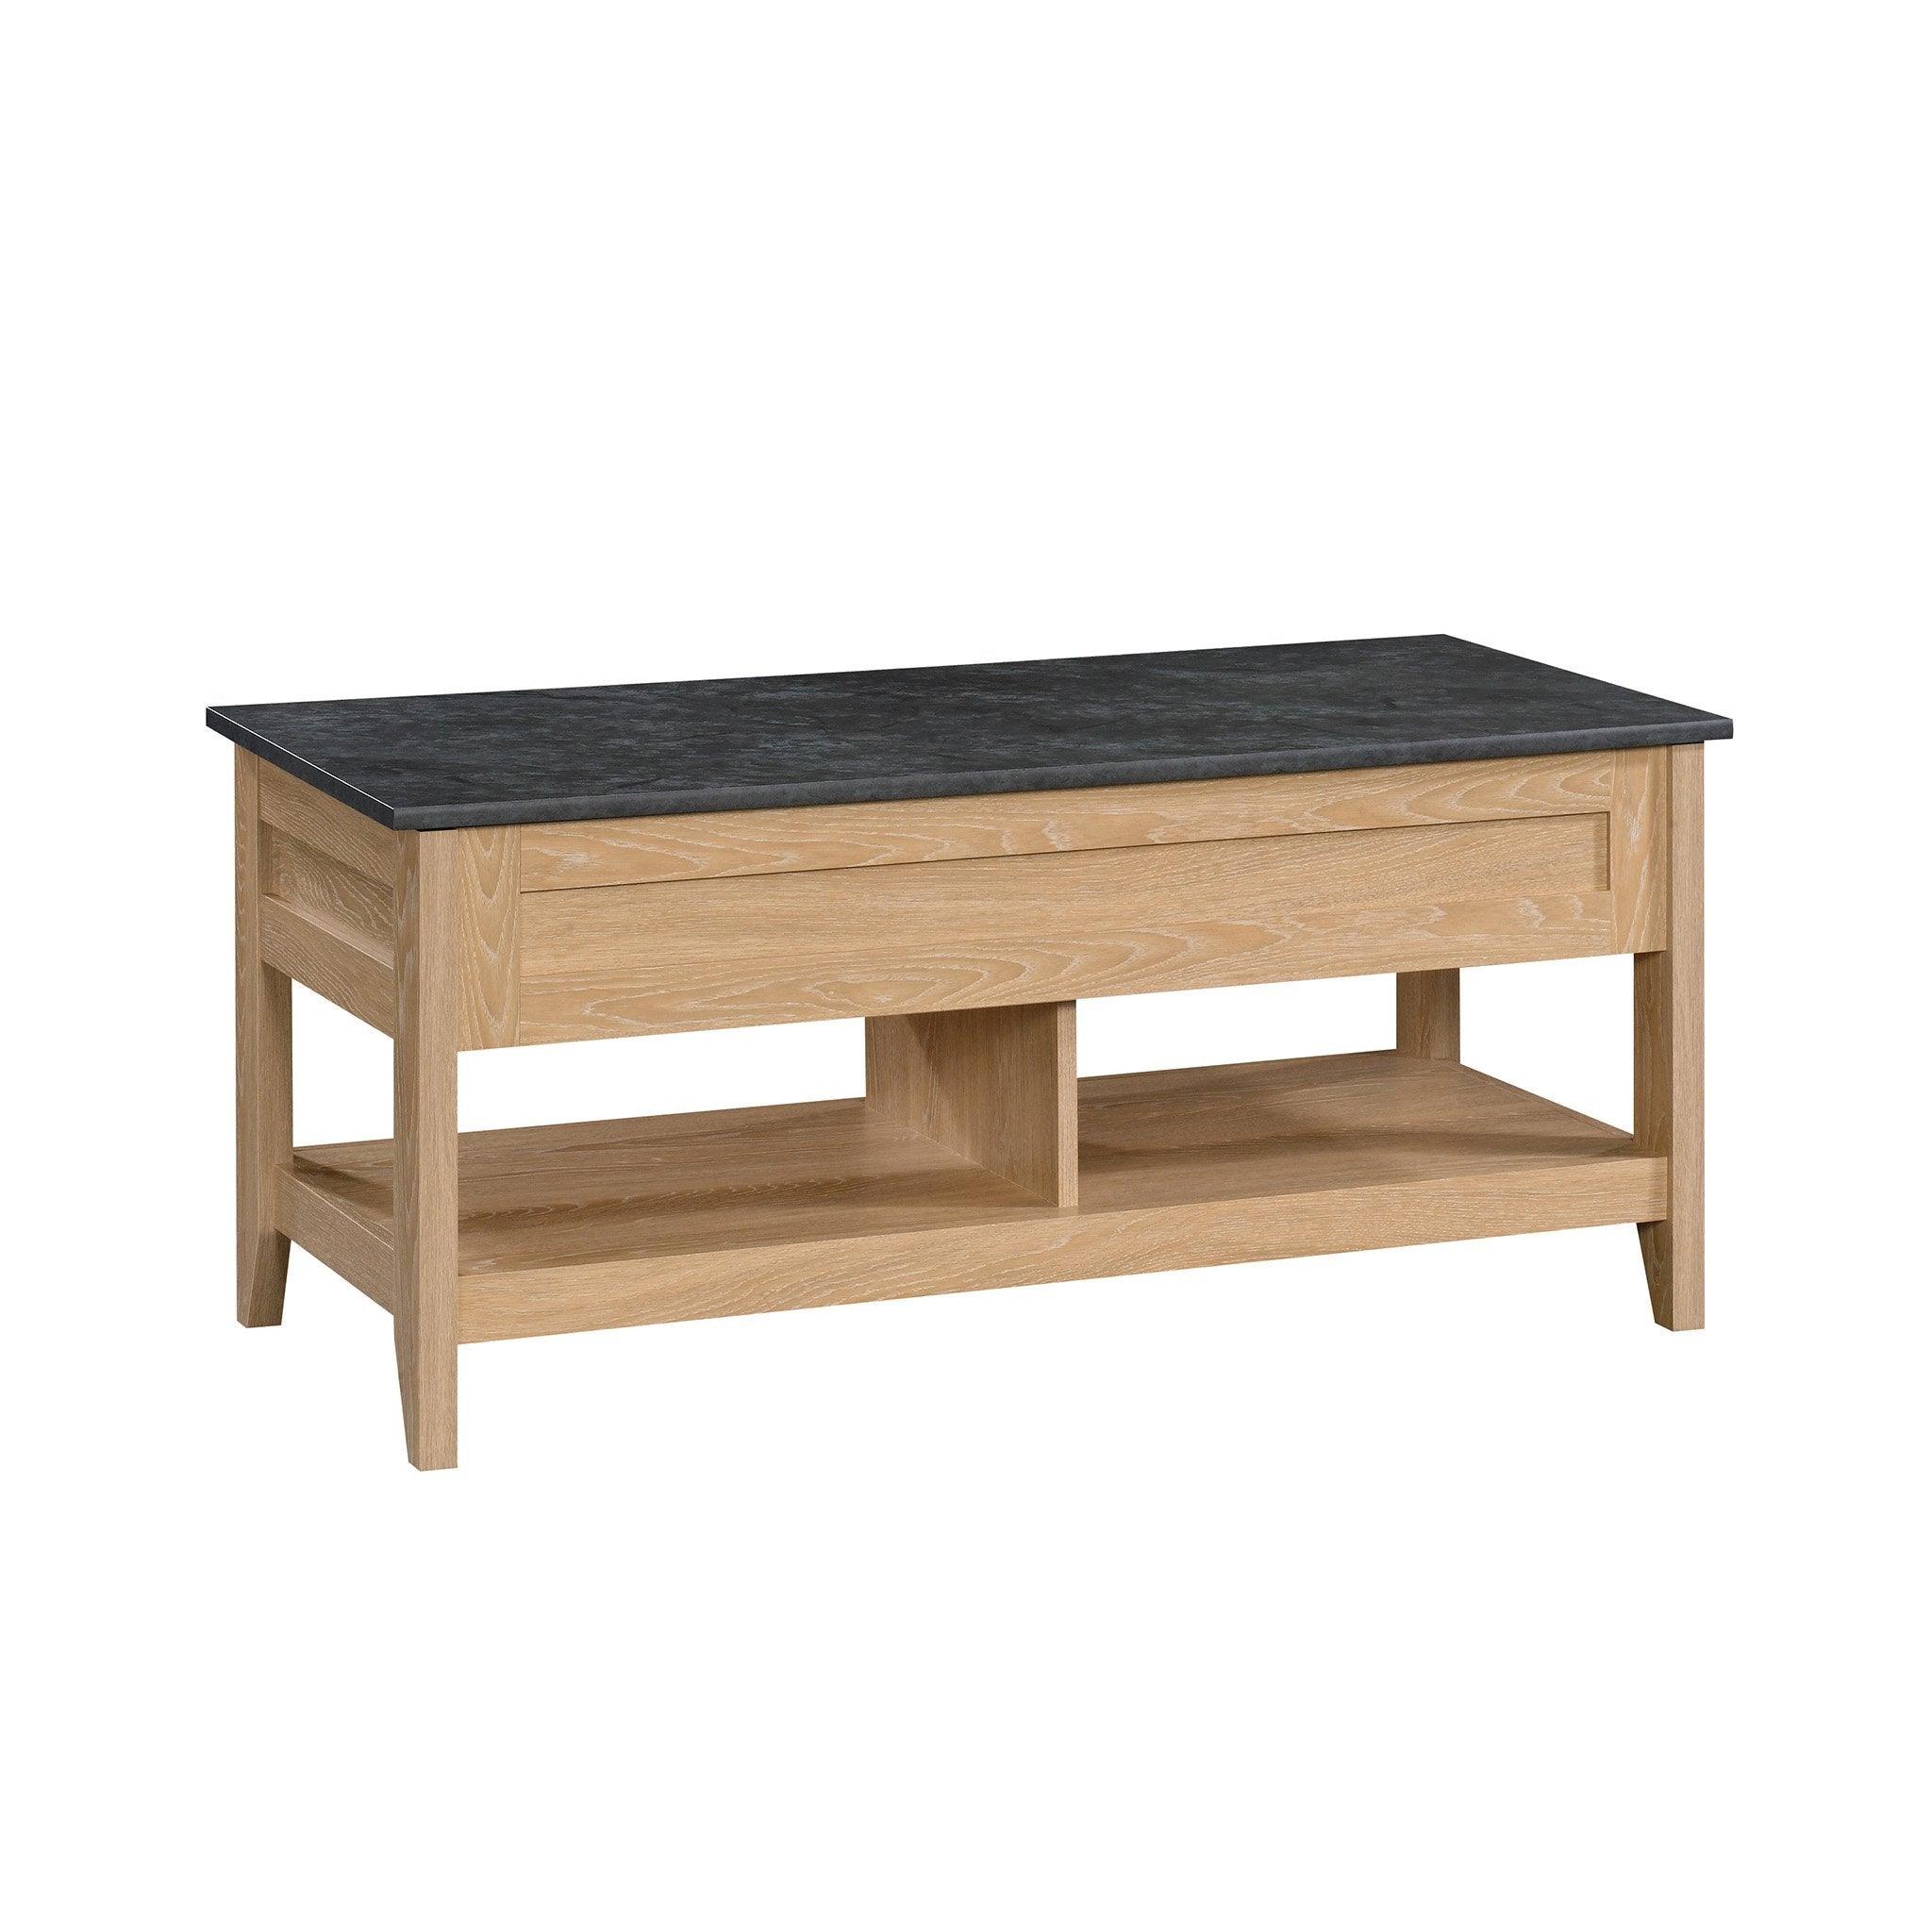 Home study lift up coffee - work table - crimblefest furniture - image 13